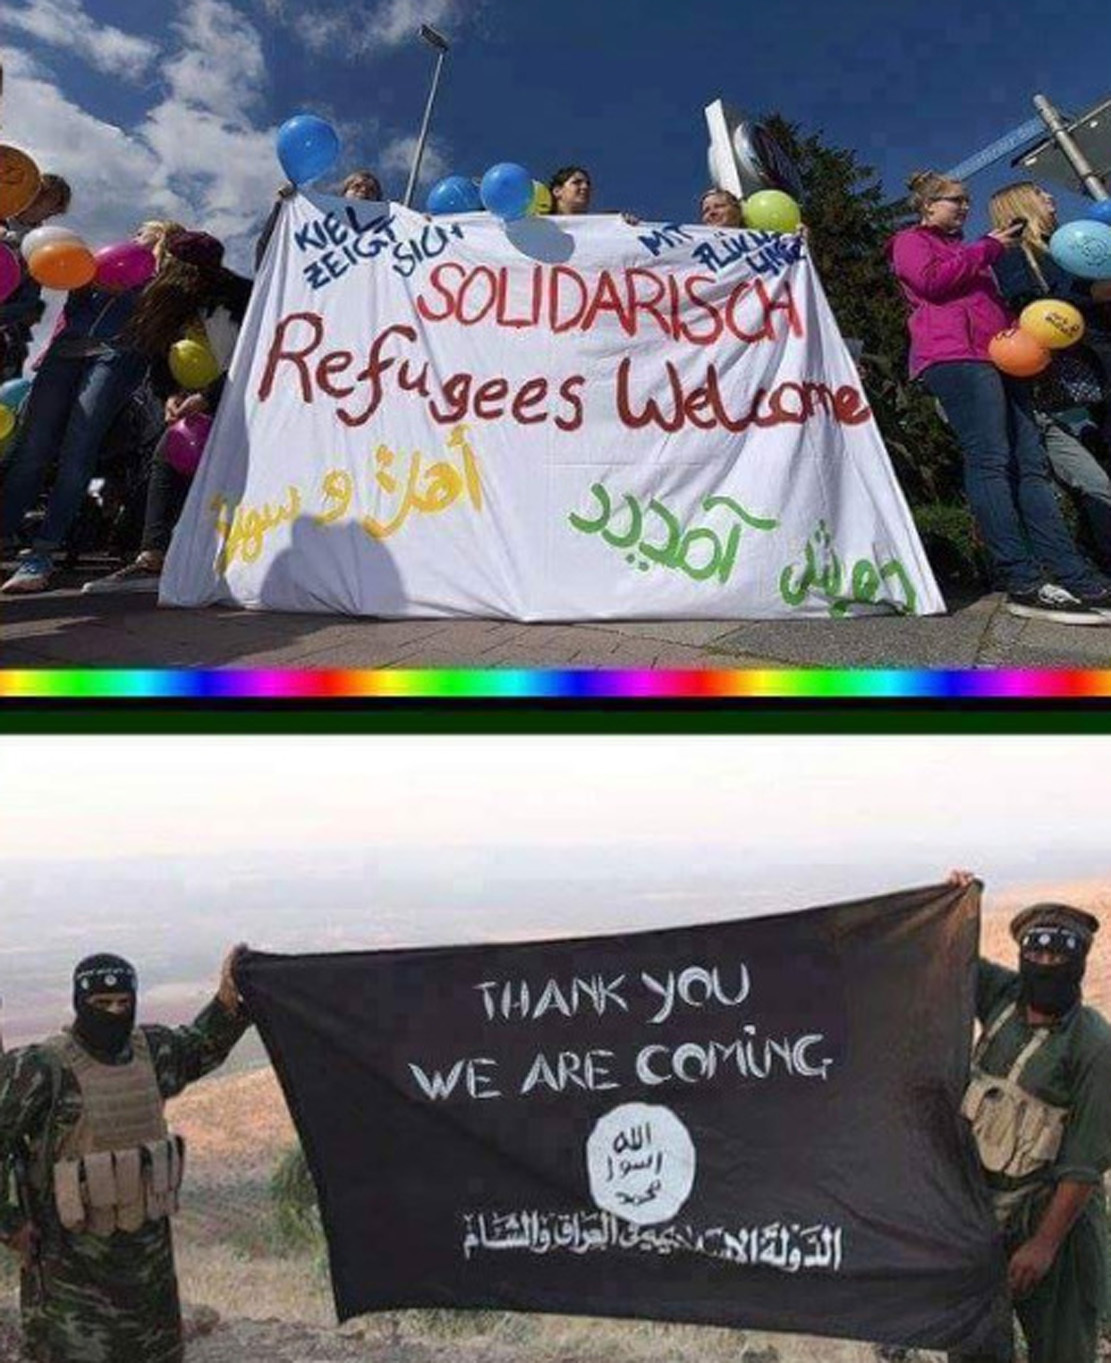 refugees-welcome-islam-isis-allah-akbar-dumb-women-want-to-die-solidarisch-anglicanize-ant-german.jpg